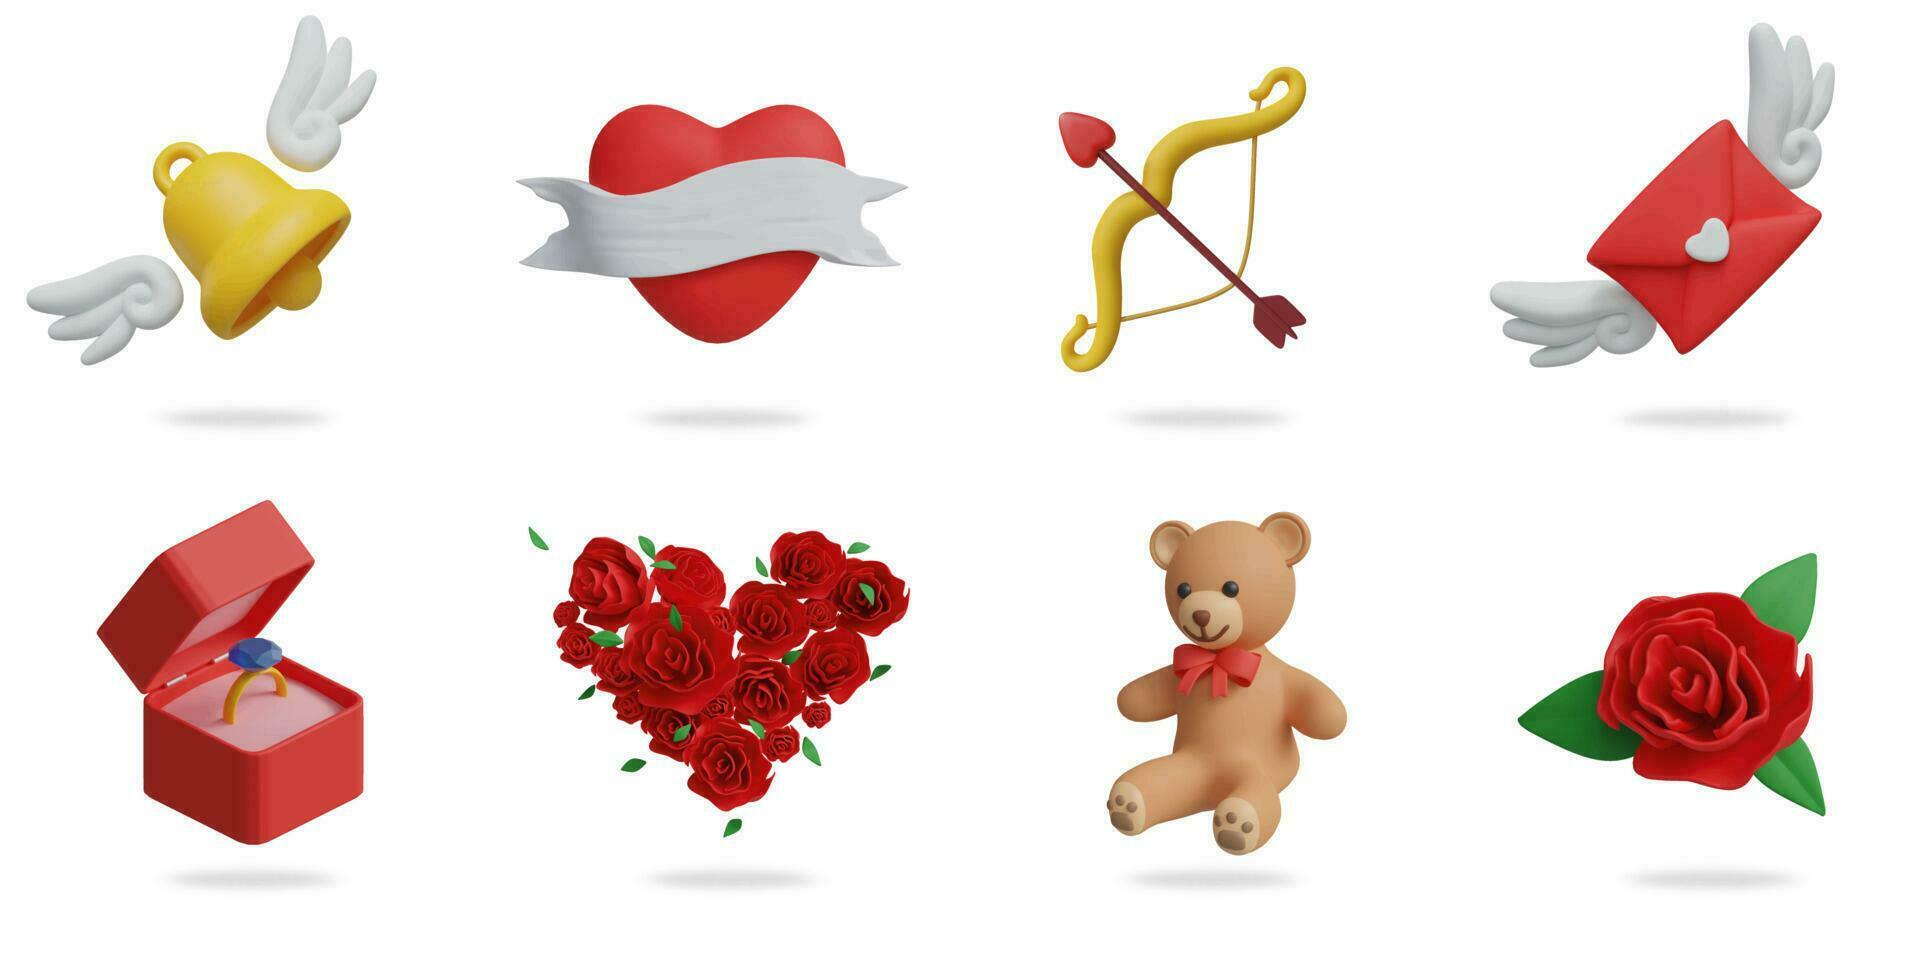 3d rendering. Valentine's Day icons set on a white background winged bell, heart tag,  bow, winged letter, wedding ring box, heart-shaped bouquet, teddy bear, rose vector